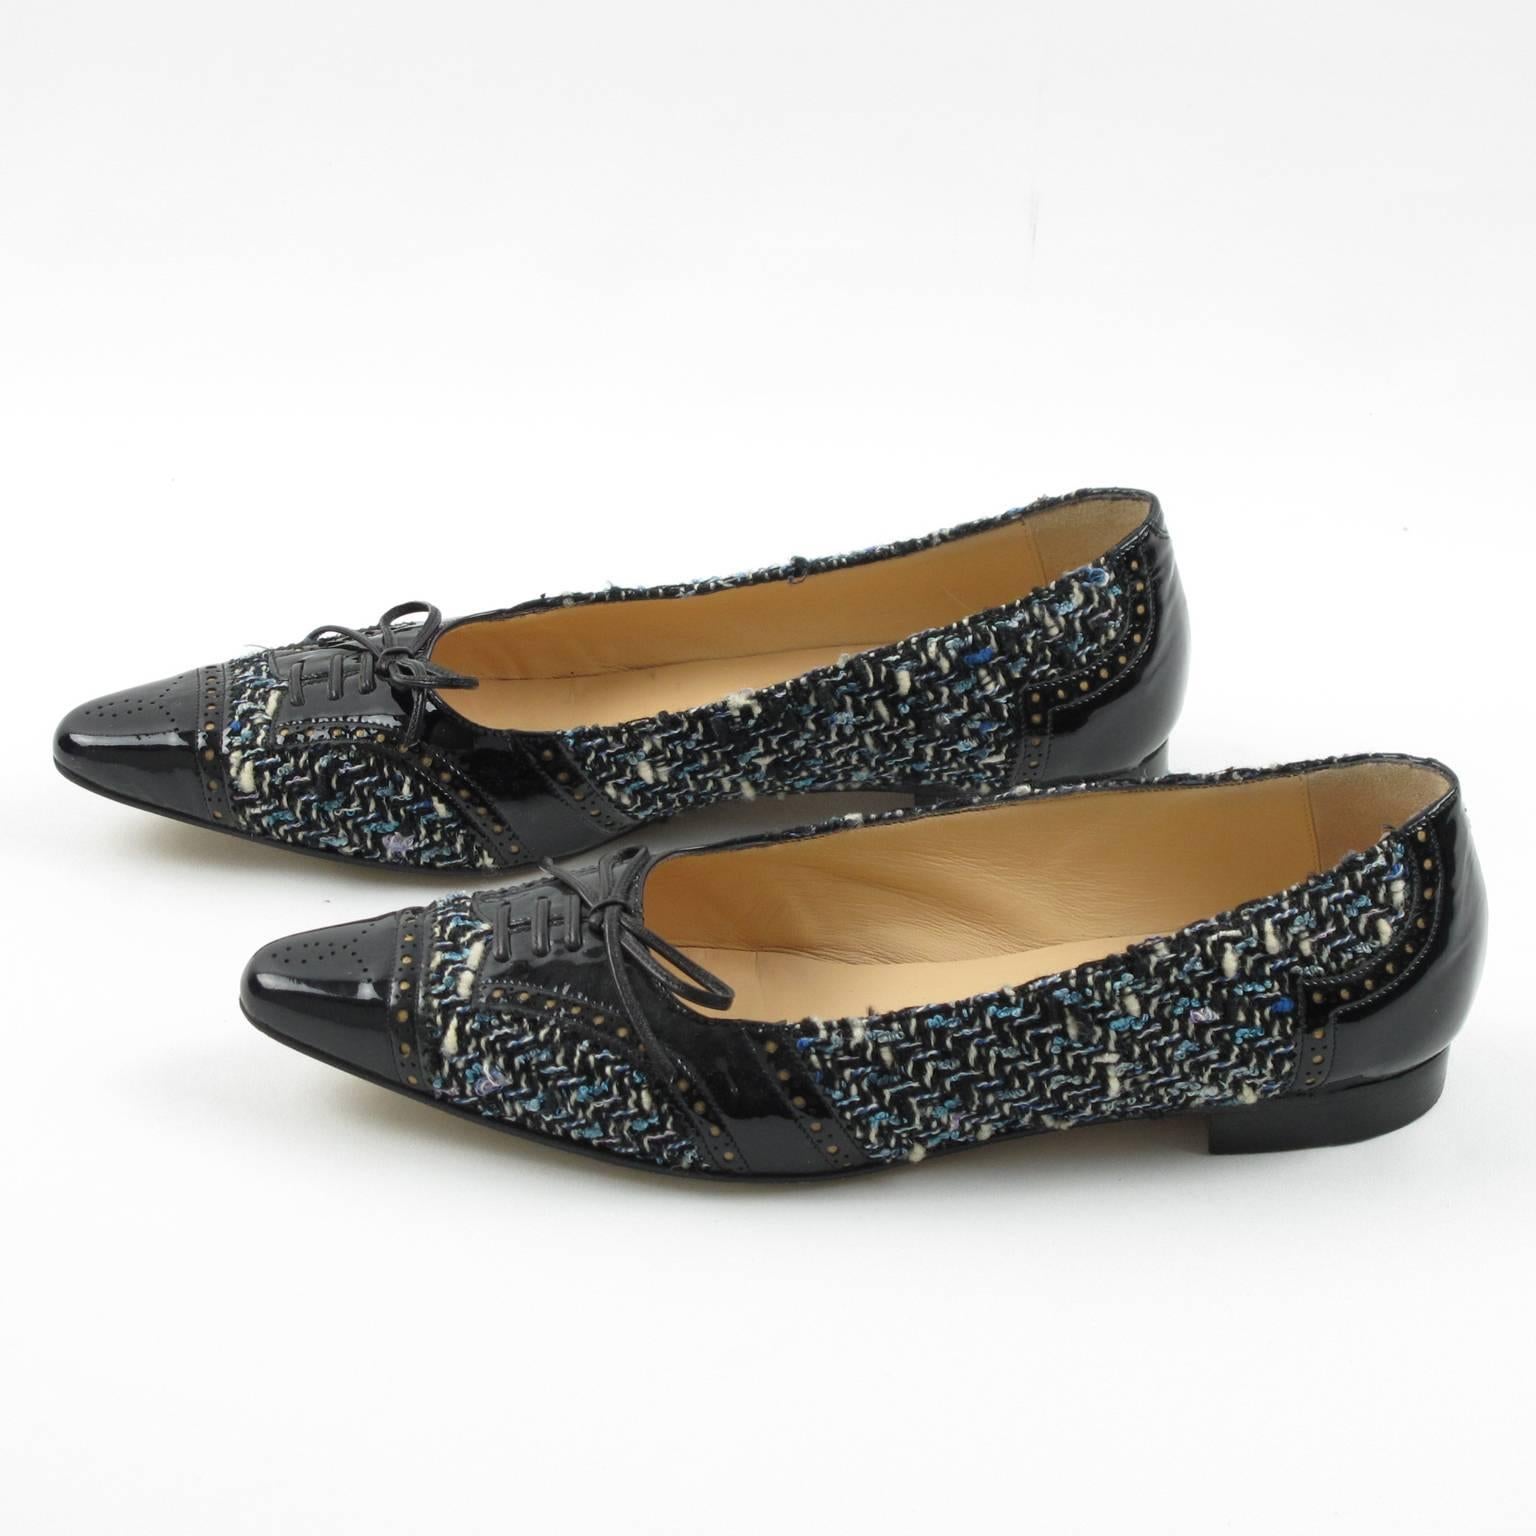 Manolo Blahnik simple and elegant flats shoes, size 37.5 (European), equivalent to 7.5 US. These Manolo Blahnik shoes are sure to become a great hit in your closet. The black patent leather is classic and adaptable and the elegant tweed fabric will